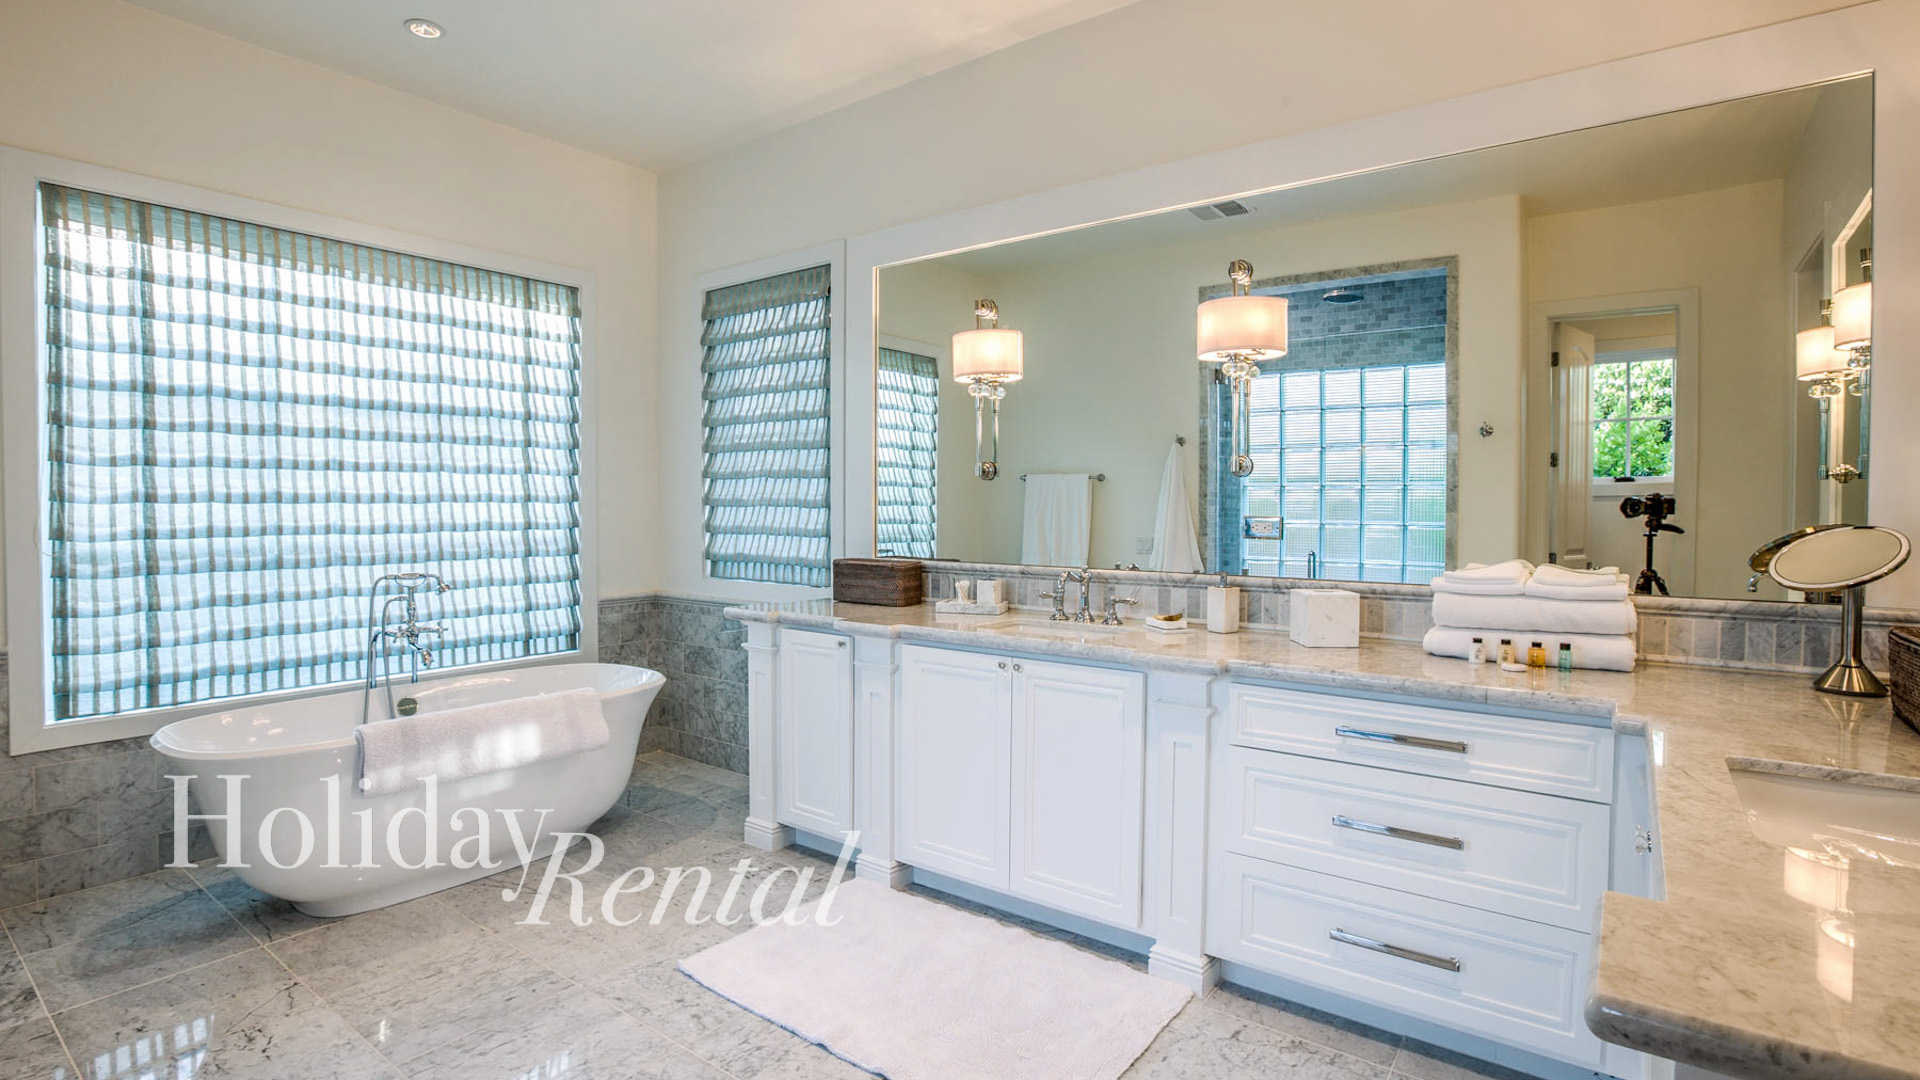 Find relaxation with our custom luxury master bathroom, featuring all new furnishings and a soothing bathtub